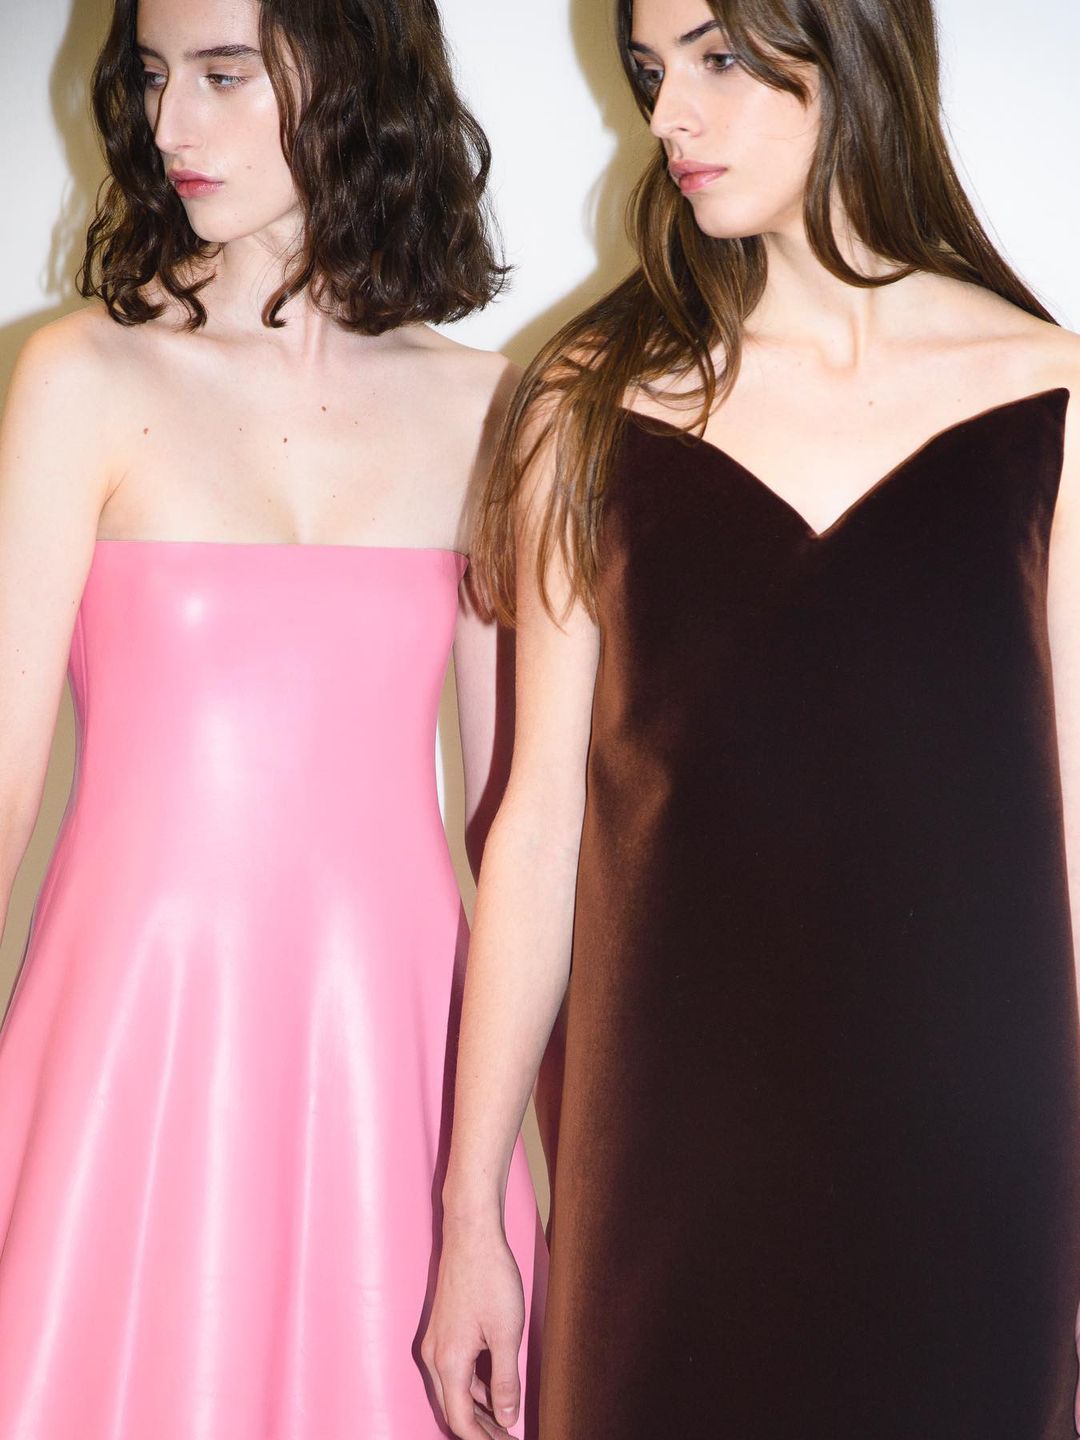 Two models pose in JW Anderson dresses. One in pink and the other in dark brown